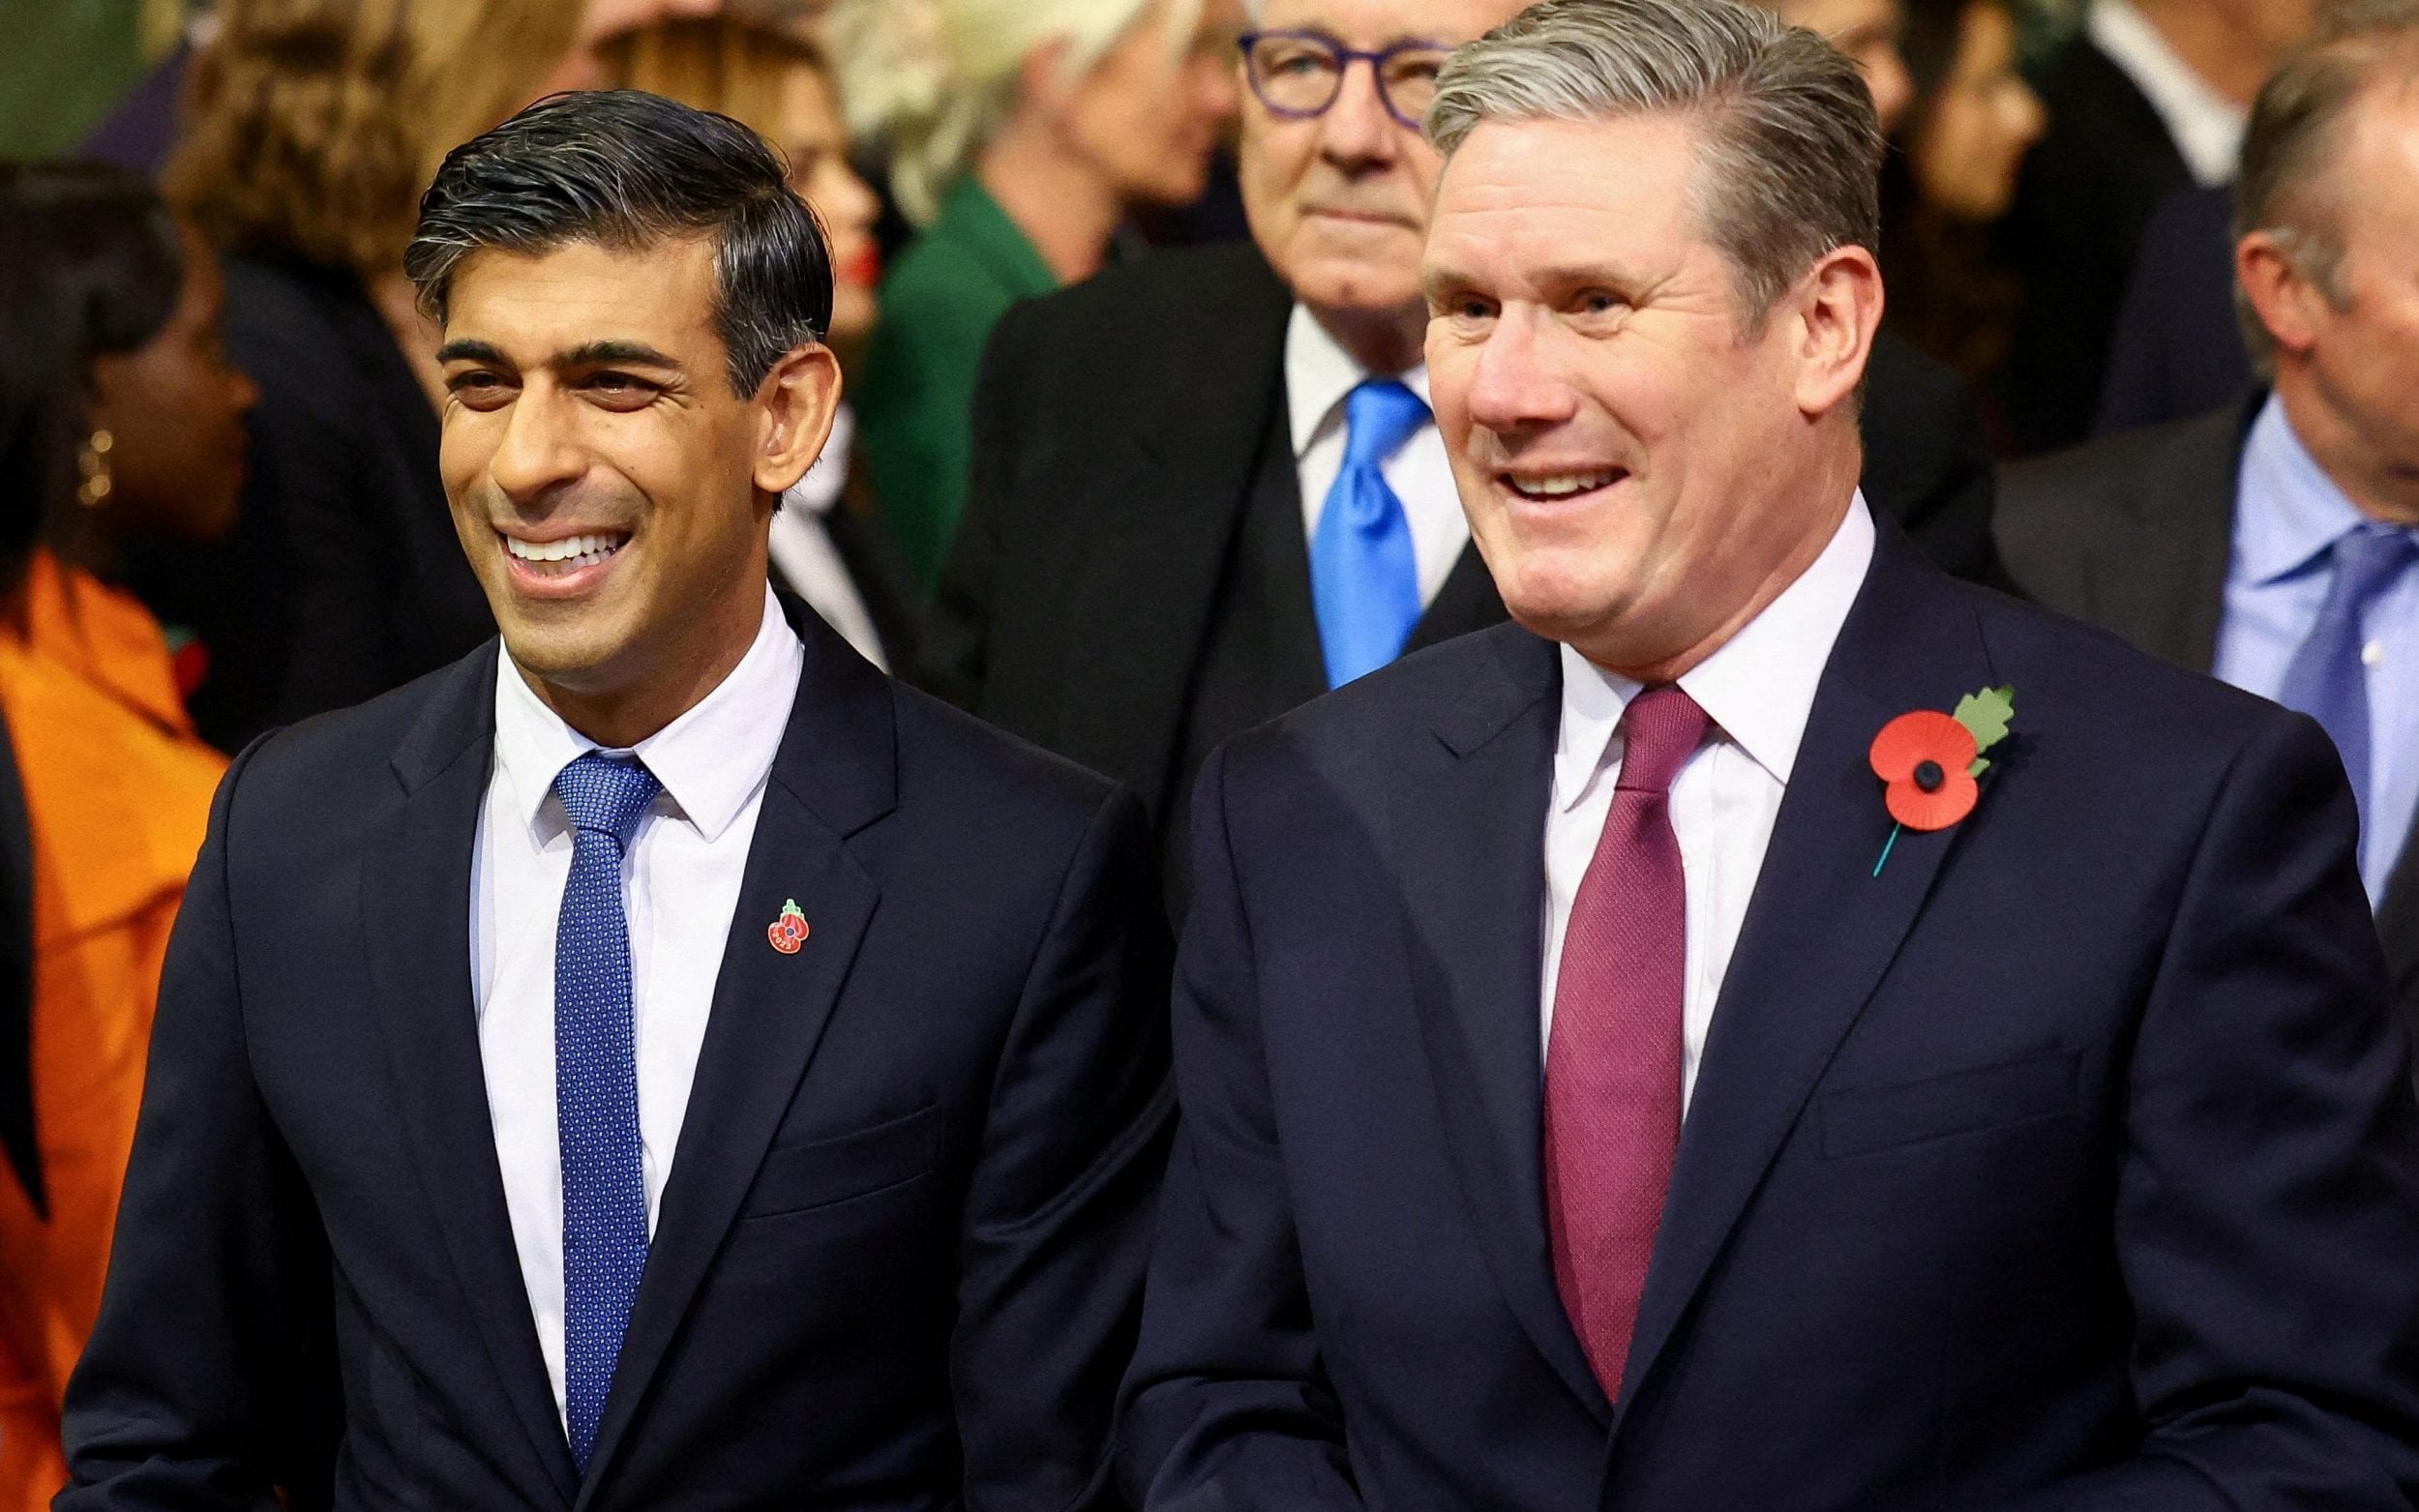 uk prime minister rishi sunak and labour party leader keir starmer photo afp